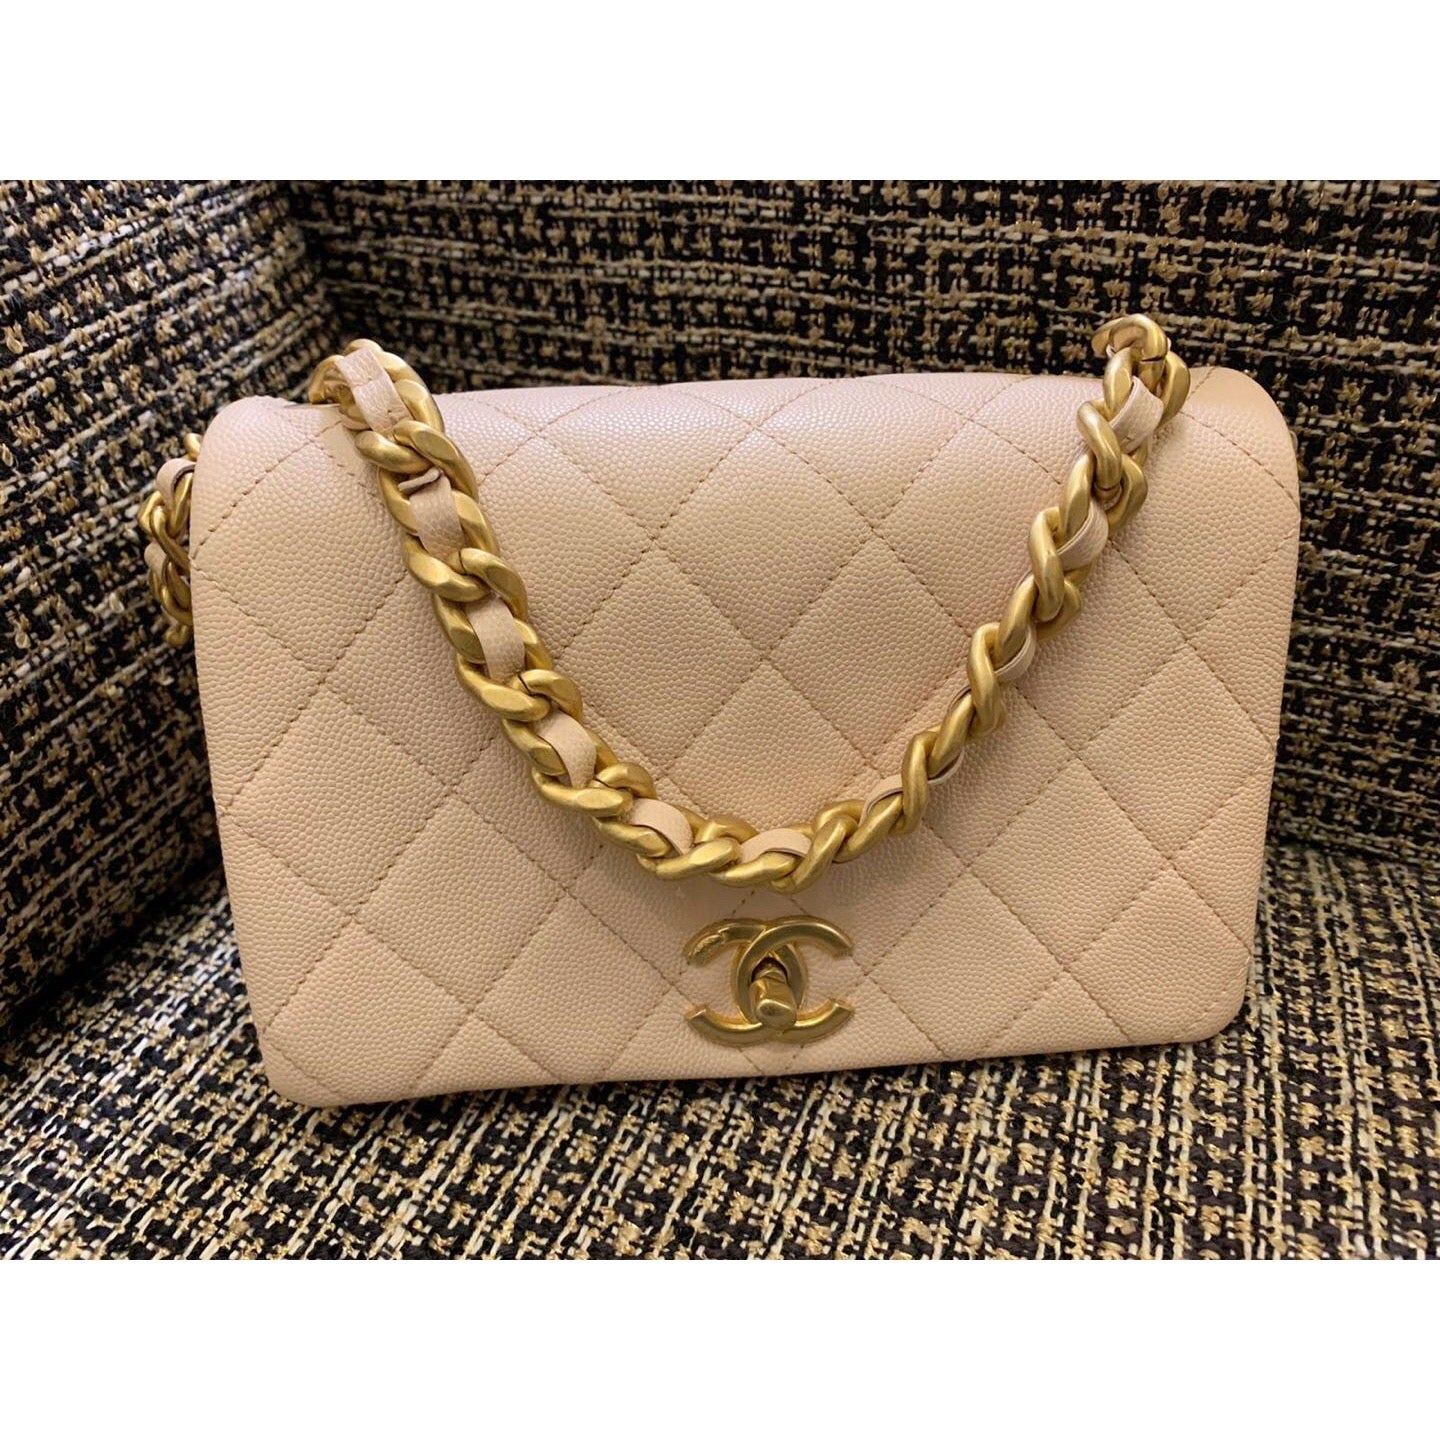 Chanel Women's Classy Variant Color Purse With Brand Box For Women's Or  Girls- Best Quality Product Bag CHA- Variants – Brandonly